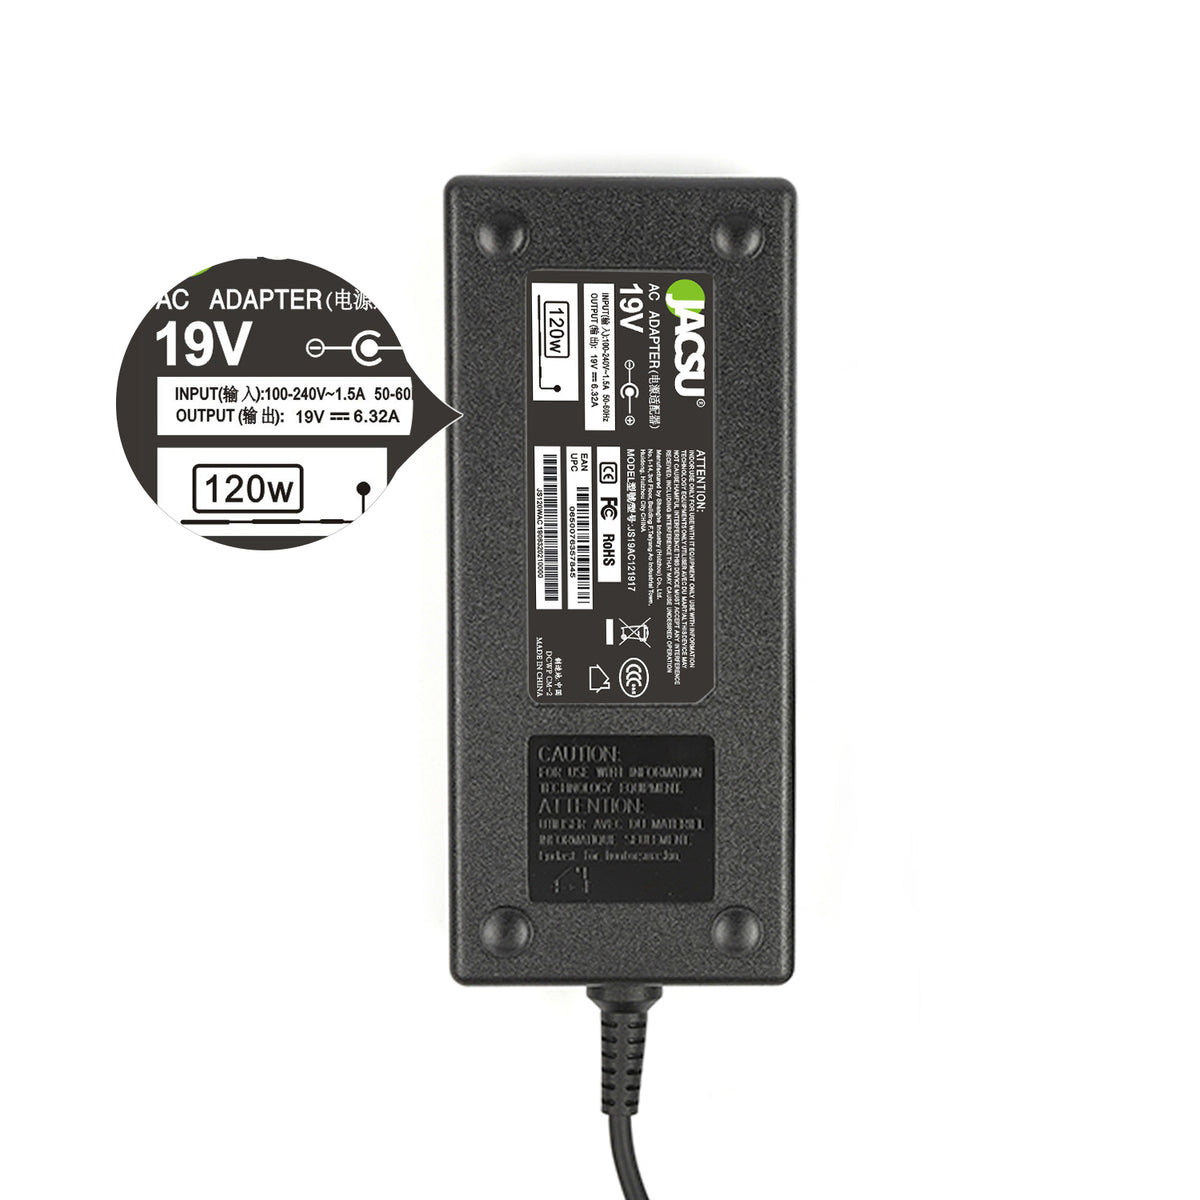 Jacsu 19V 6.32A 120W (5.5*1.7mm) AC Laptop Adapter Charger For Aspire 8951G AS8951G 5551 V3-771G-9809 Notebook